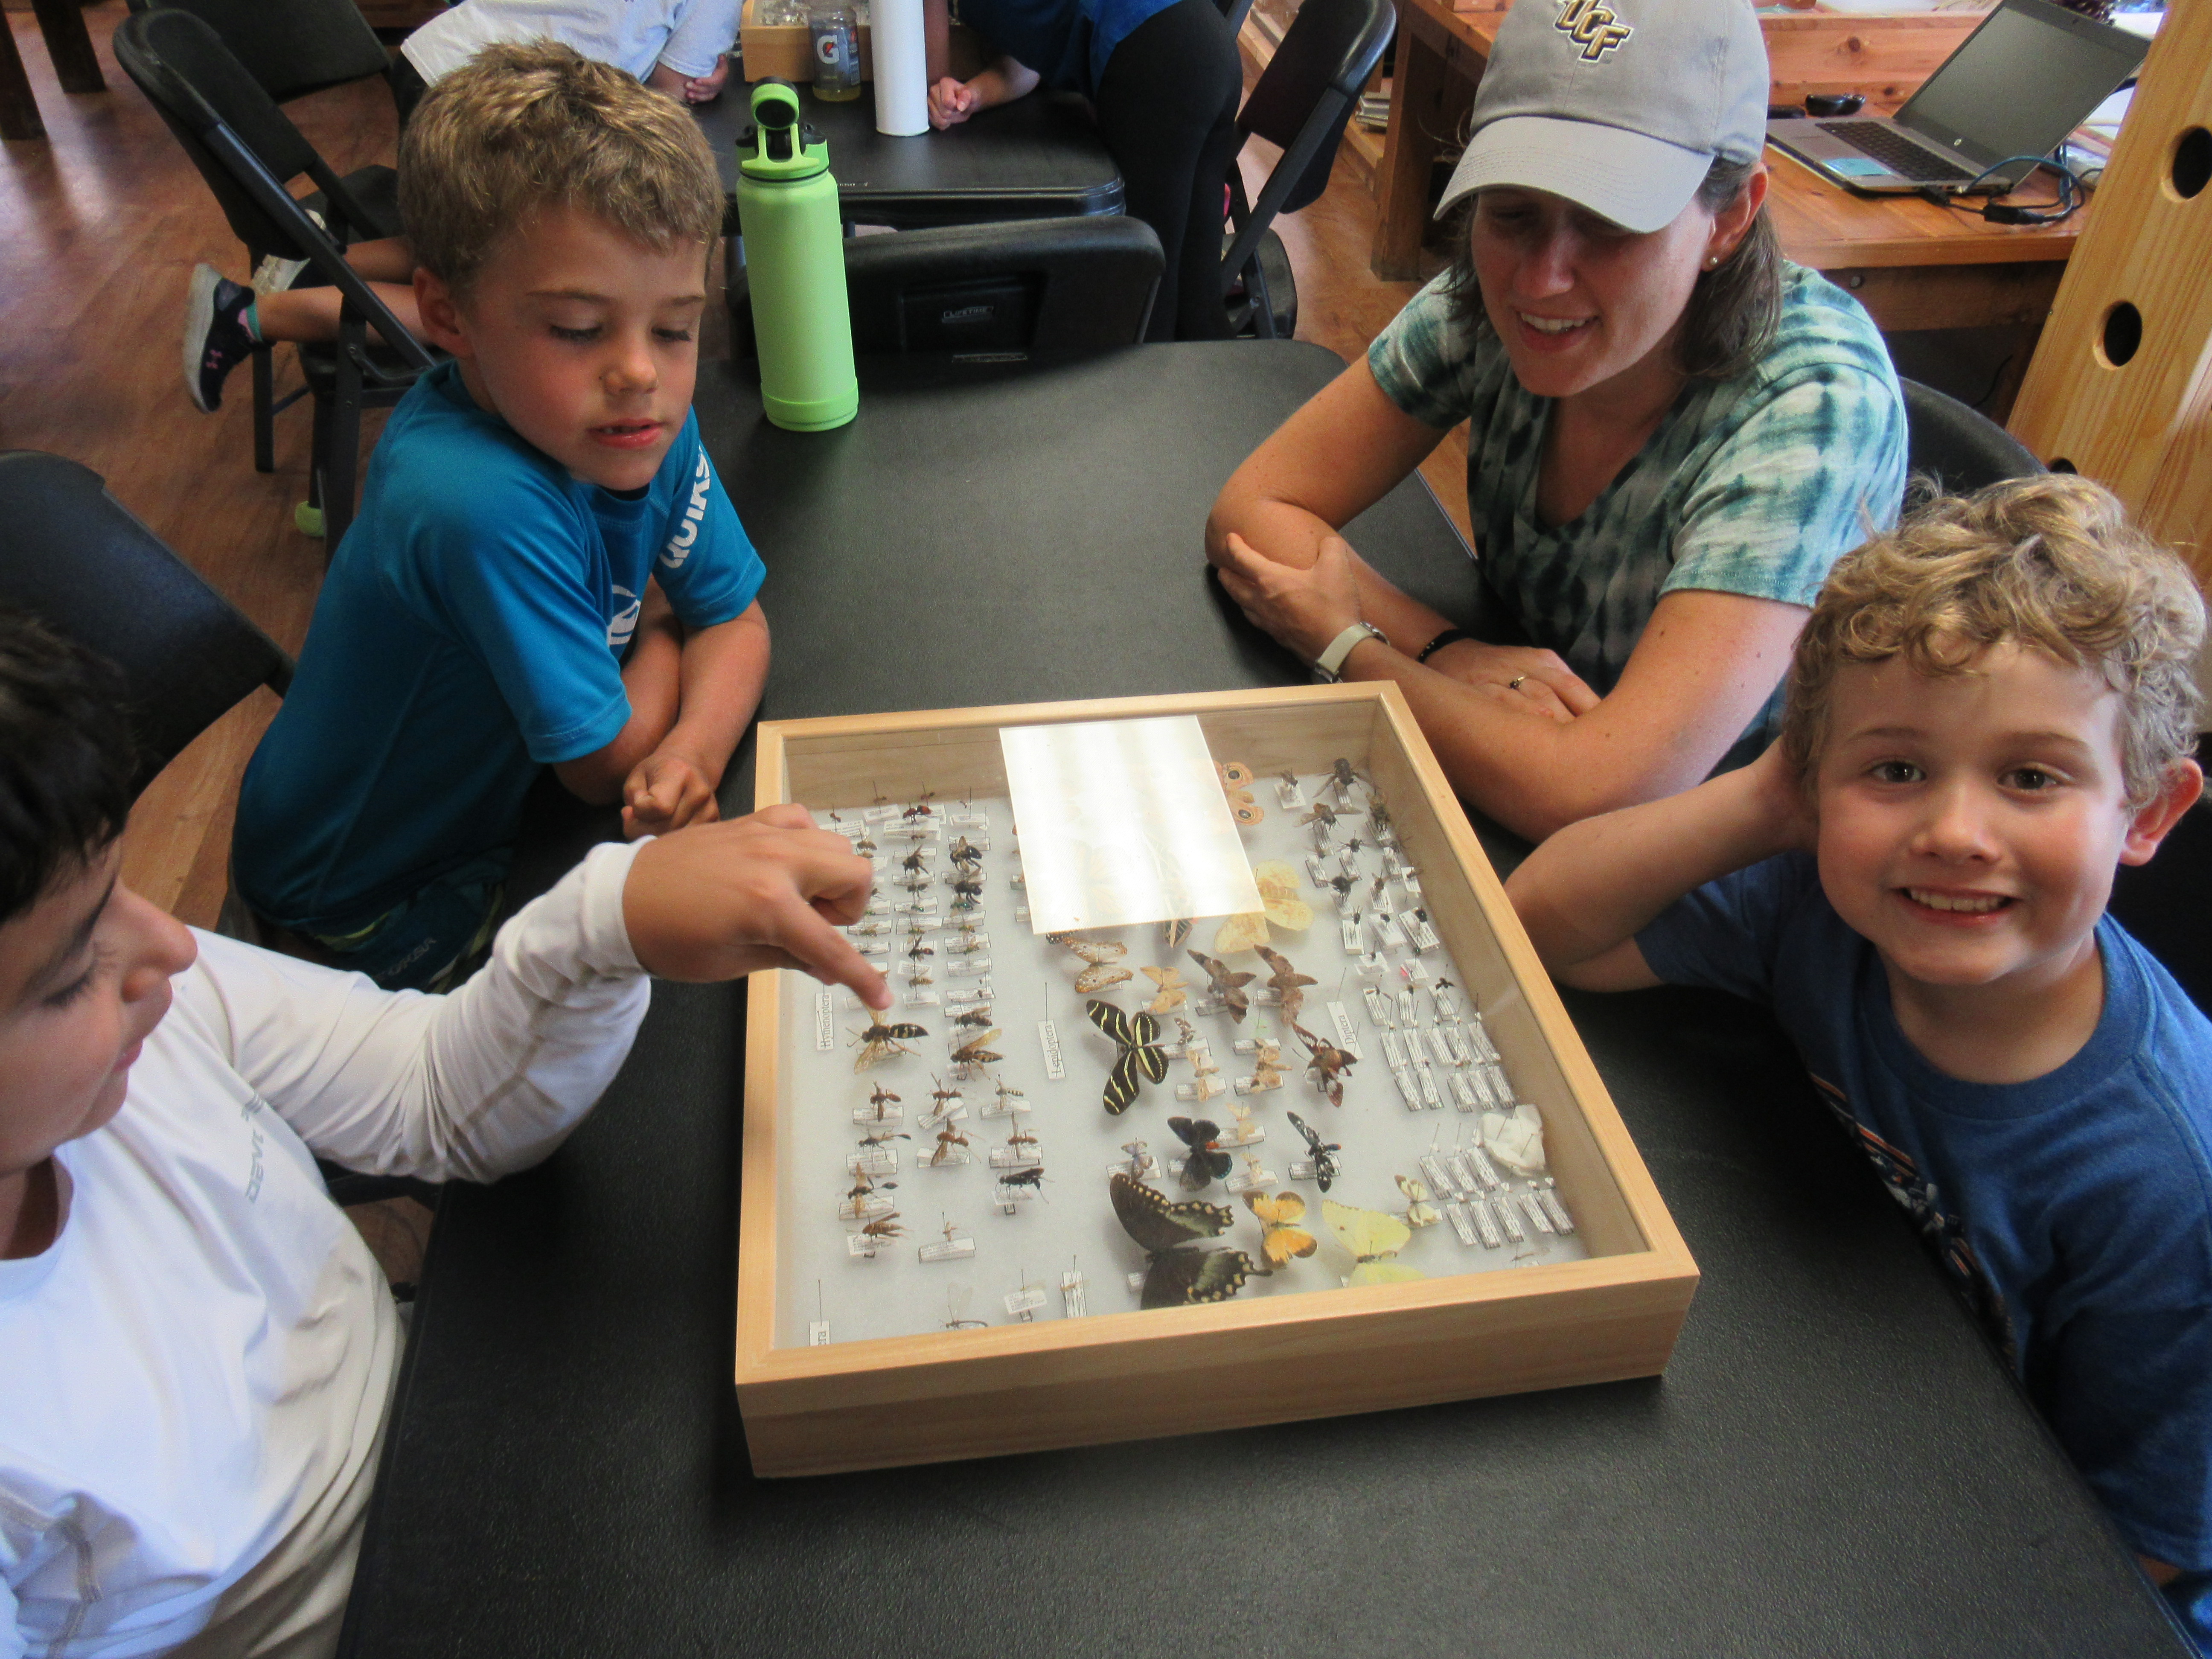 Campers looking and pointing at a case full of mounted insects.